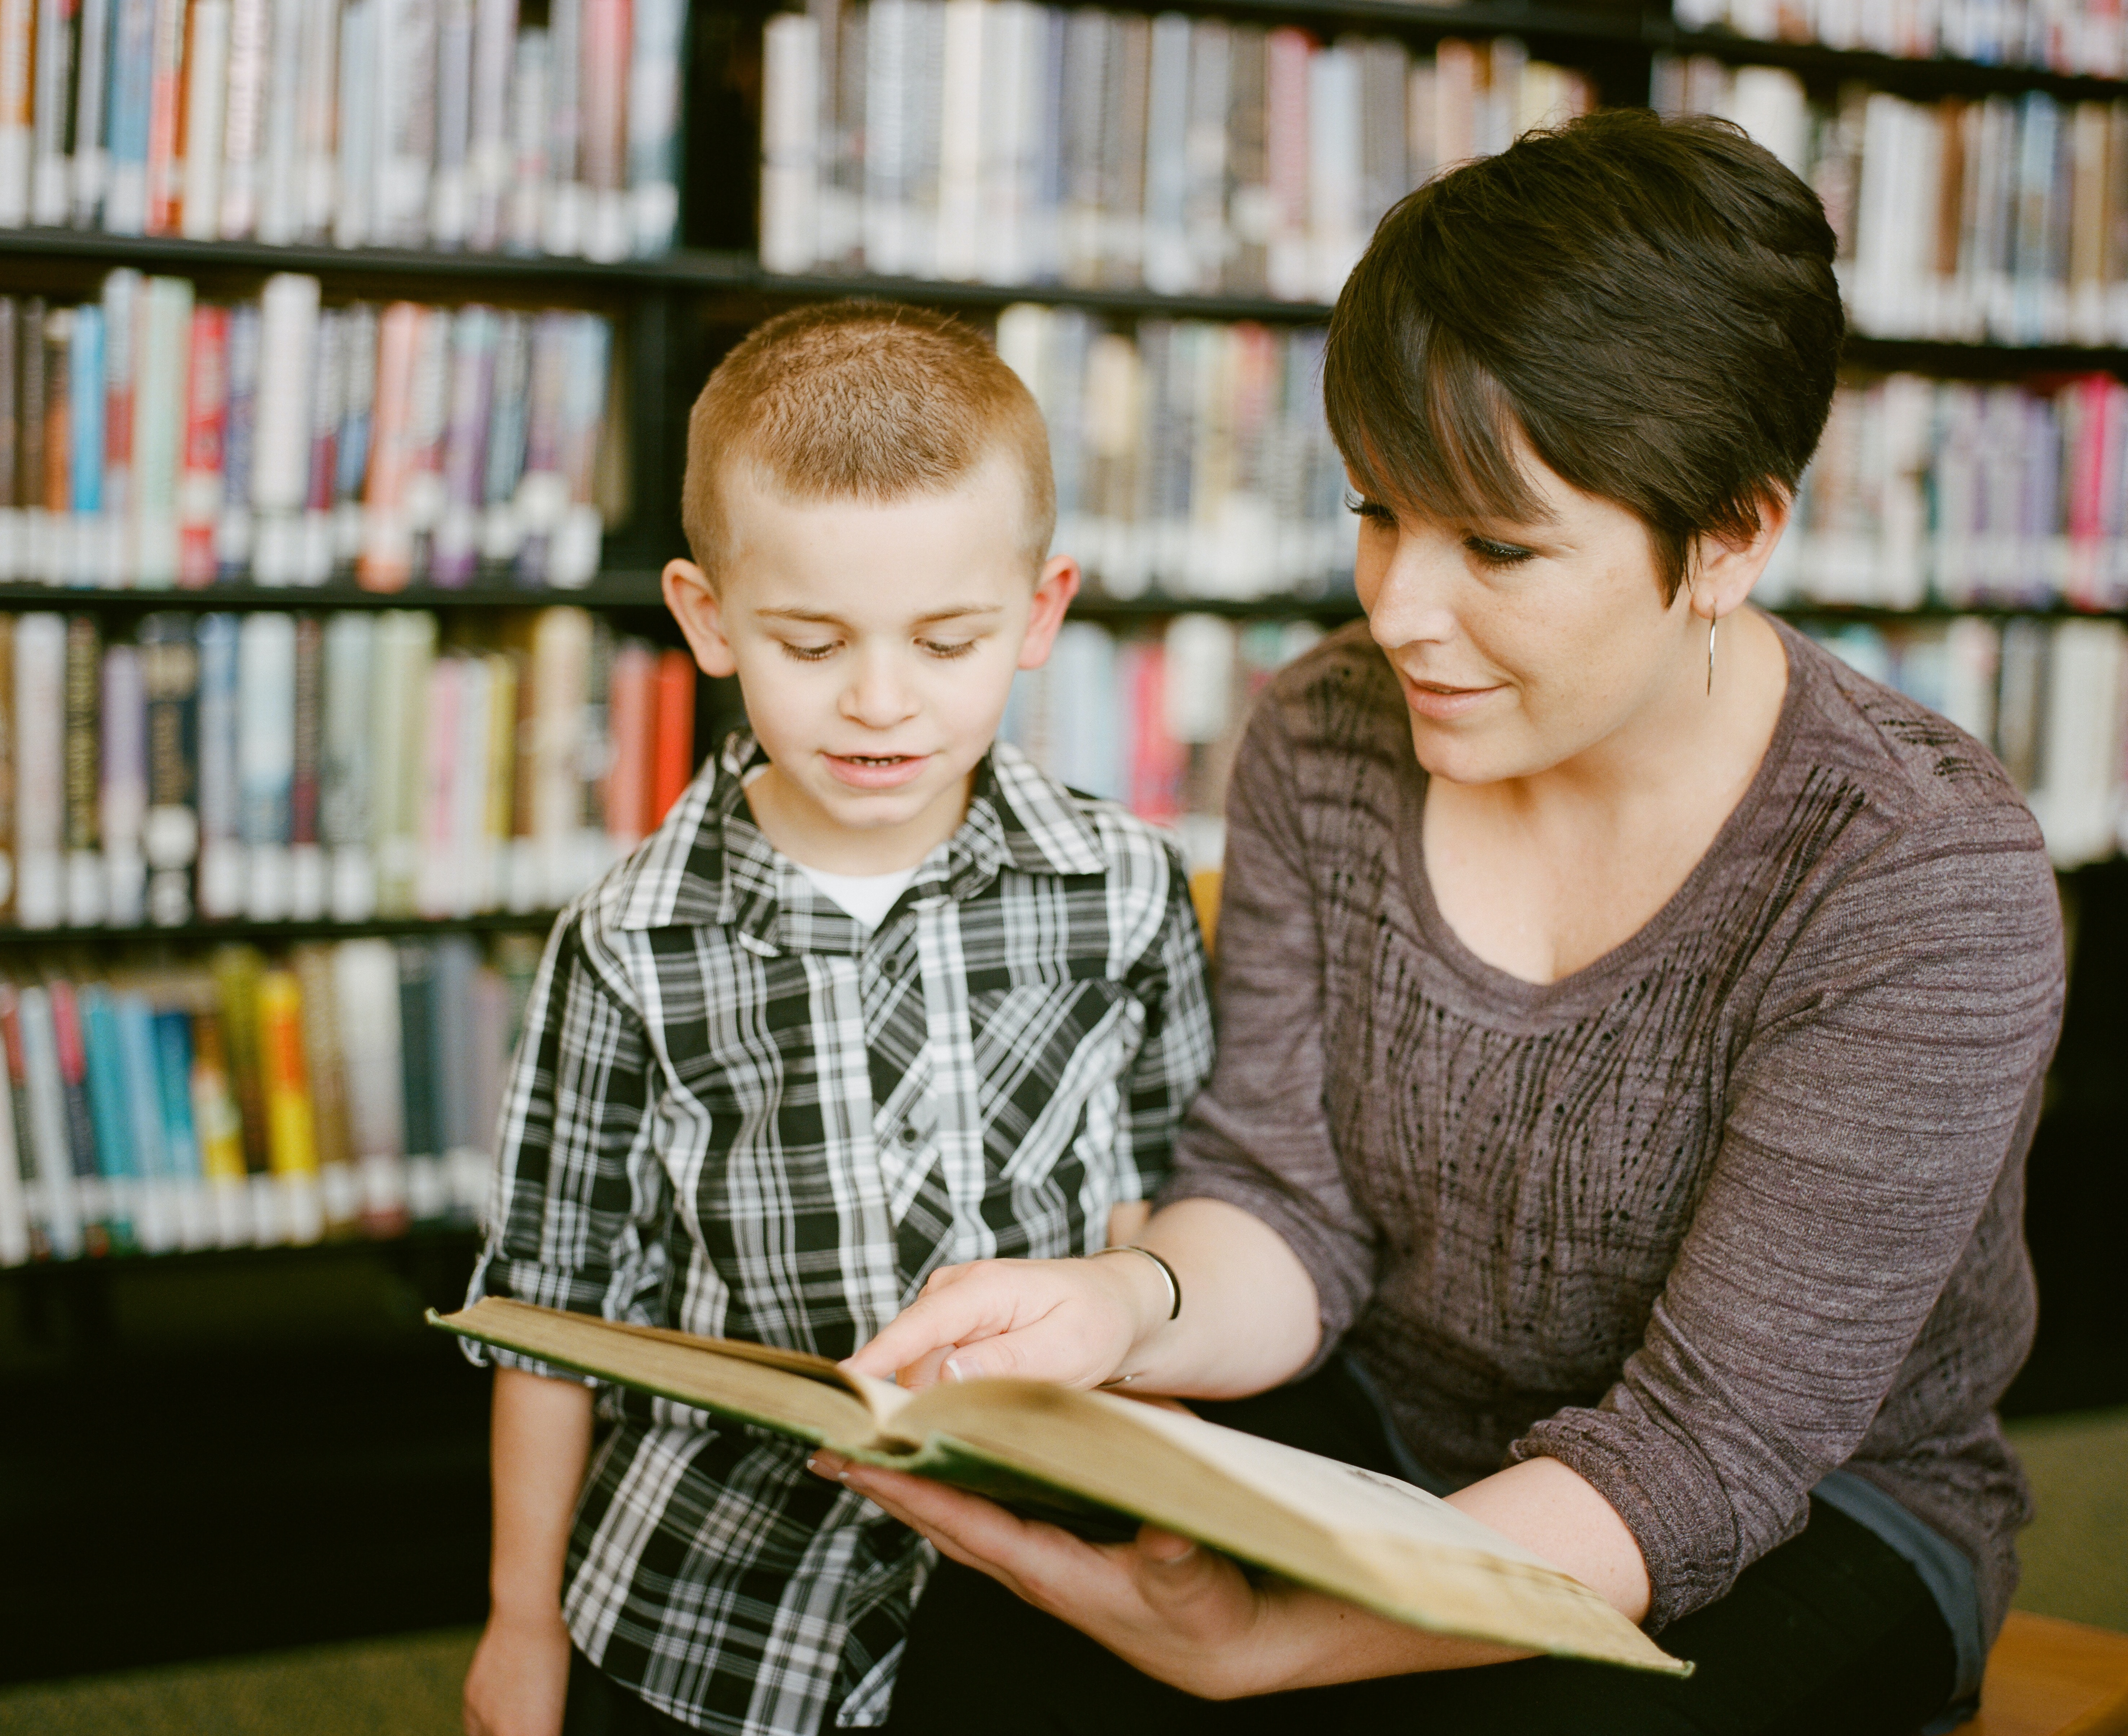 Lady reading a book with a young boy